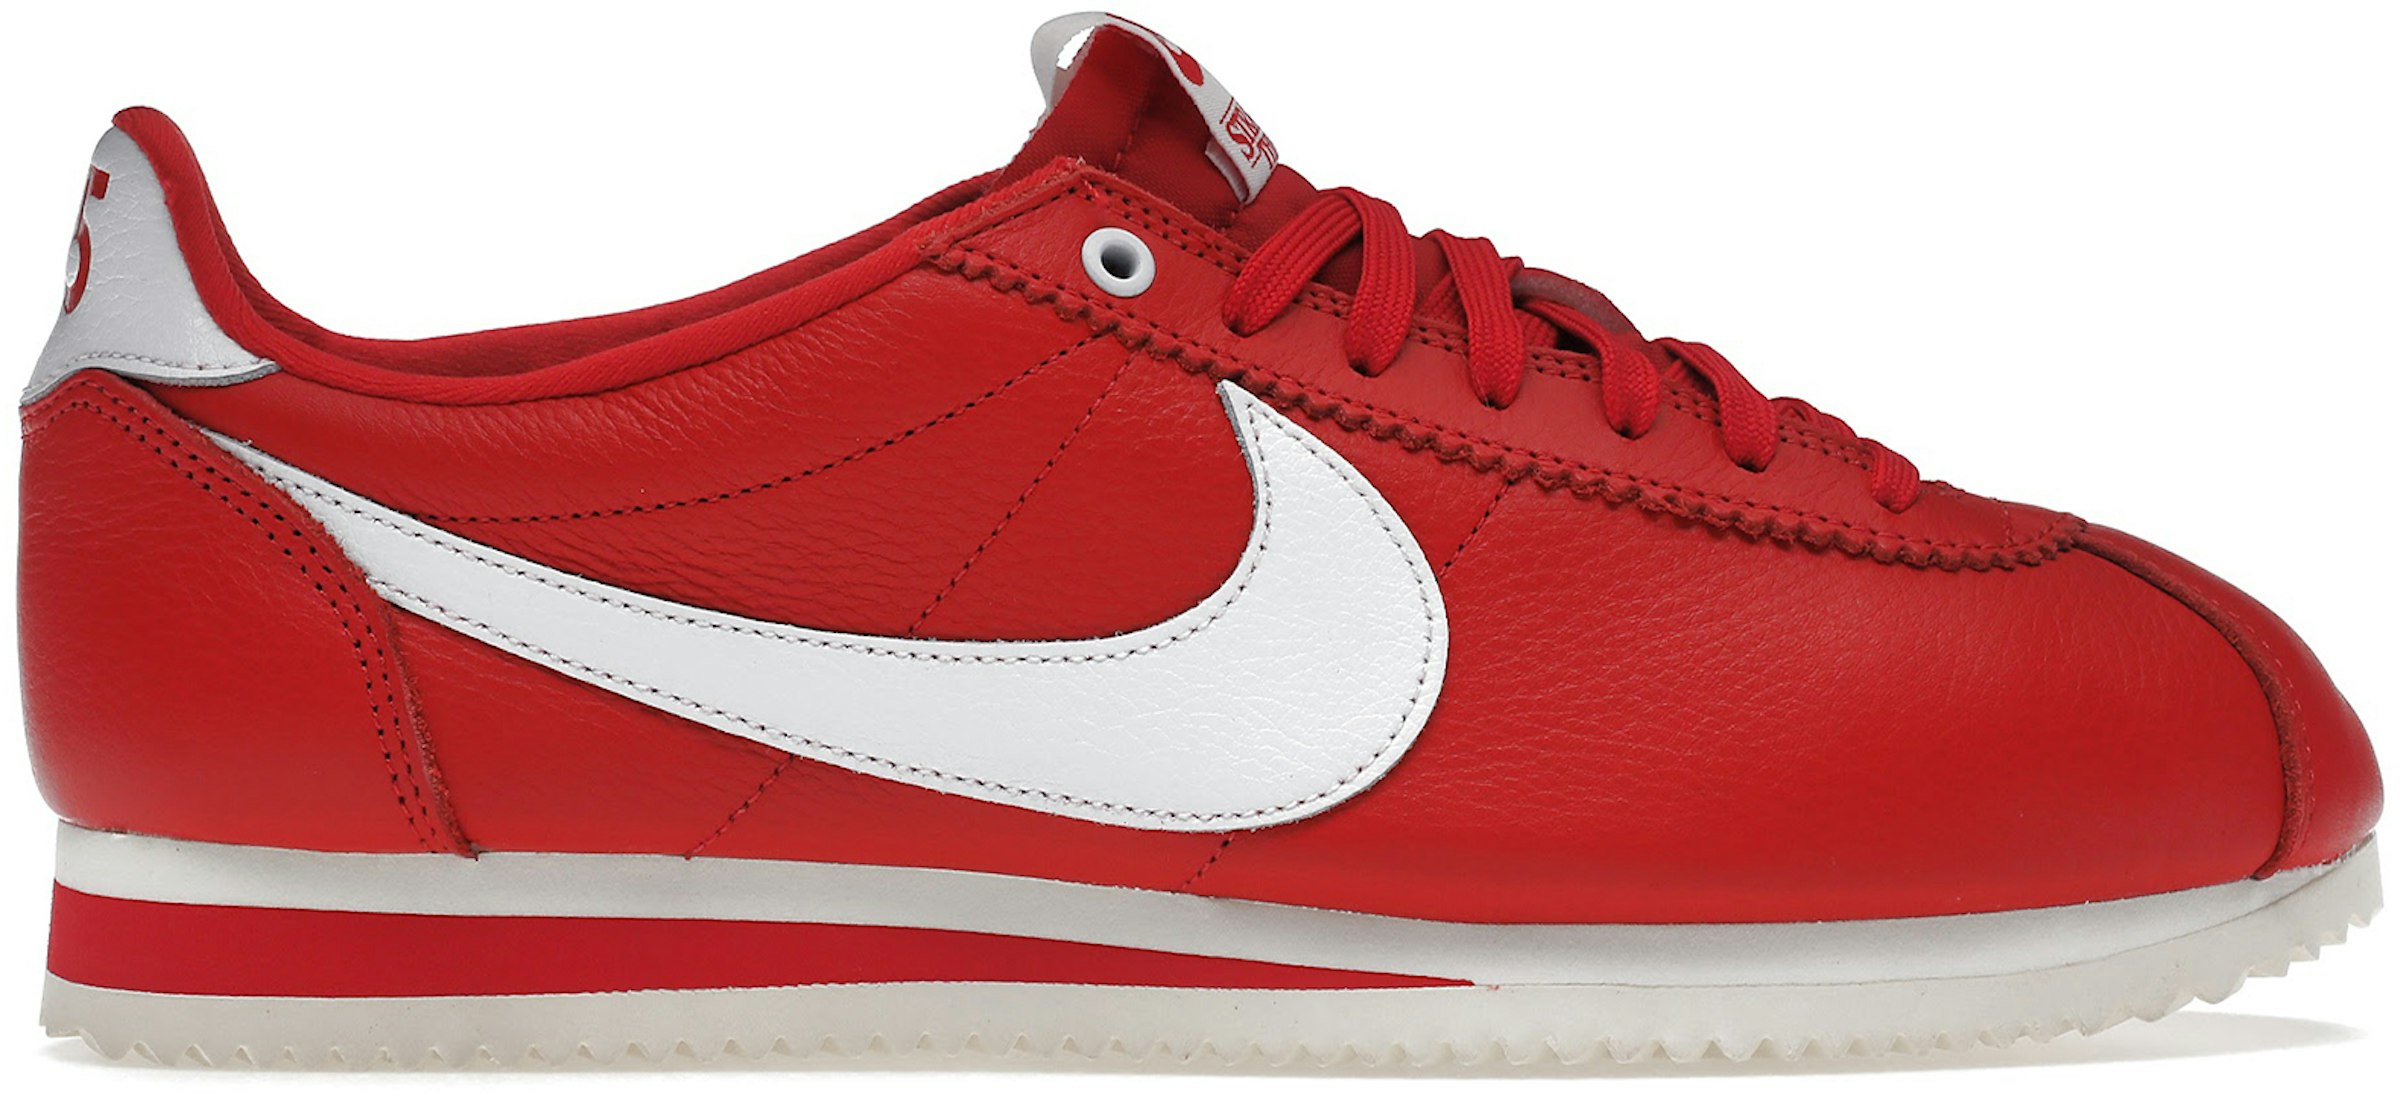 A bordo Piquete Abrumador Nike Classic Cortez Stranger Things Independence Day Pack Men's -  CK1907-600 - US